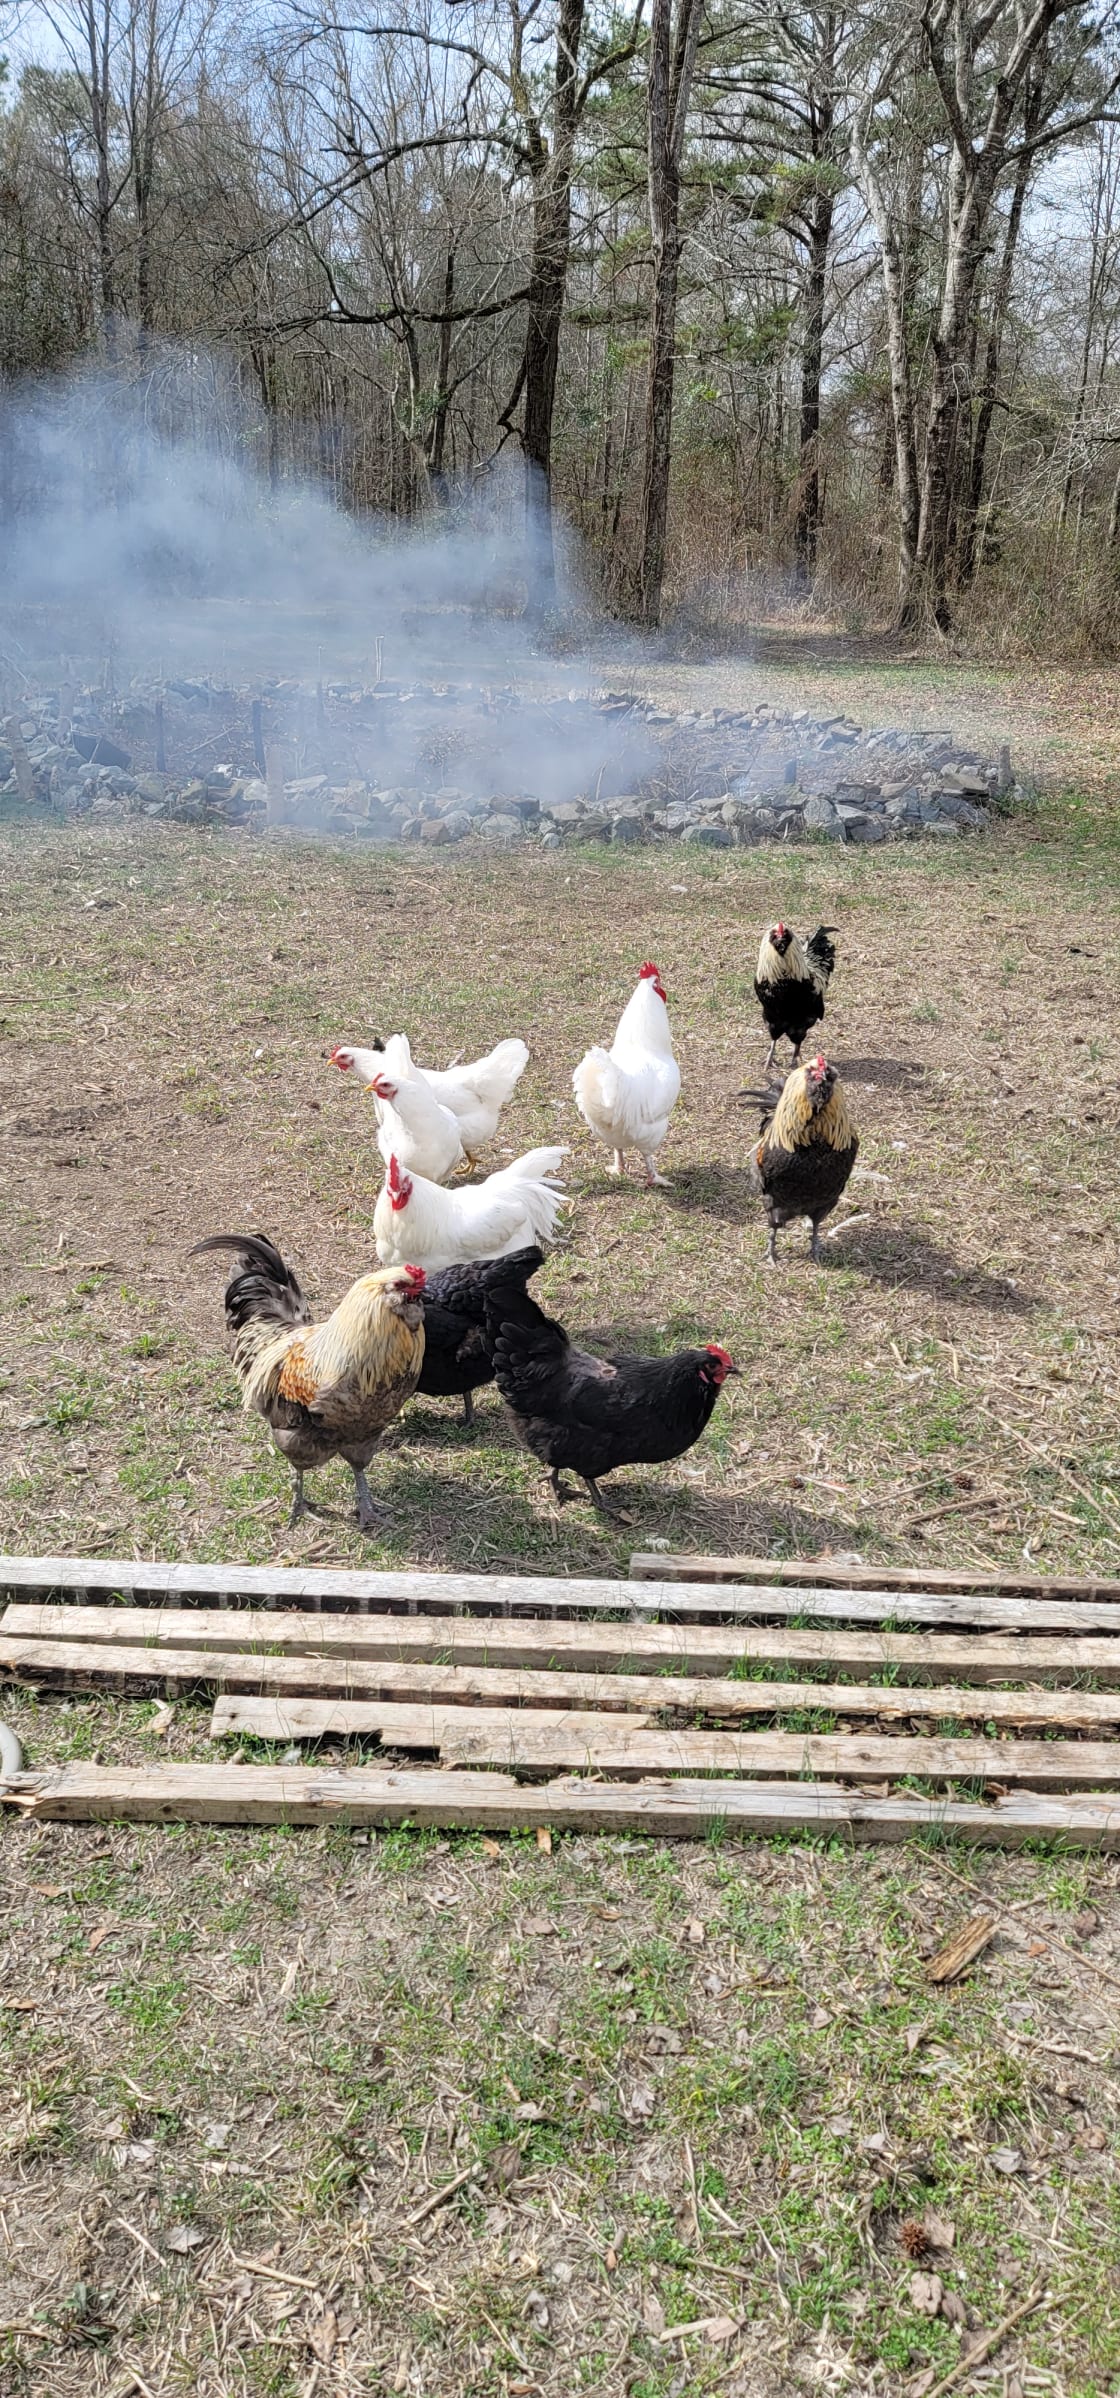 Here are a few of the chickens enjoying the sunshine.